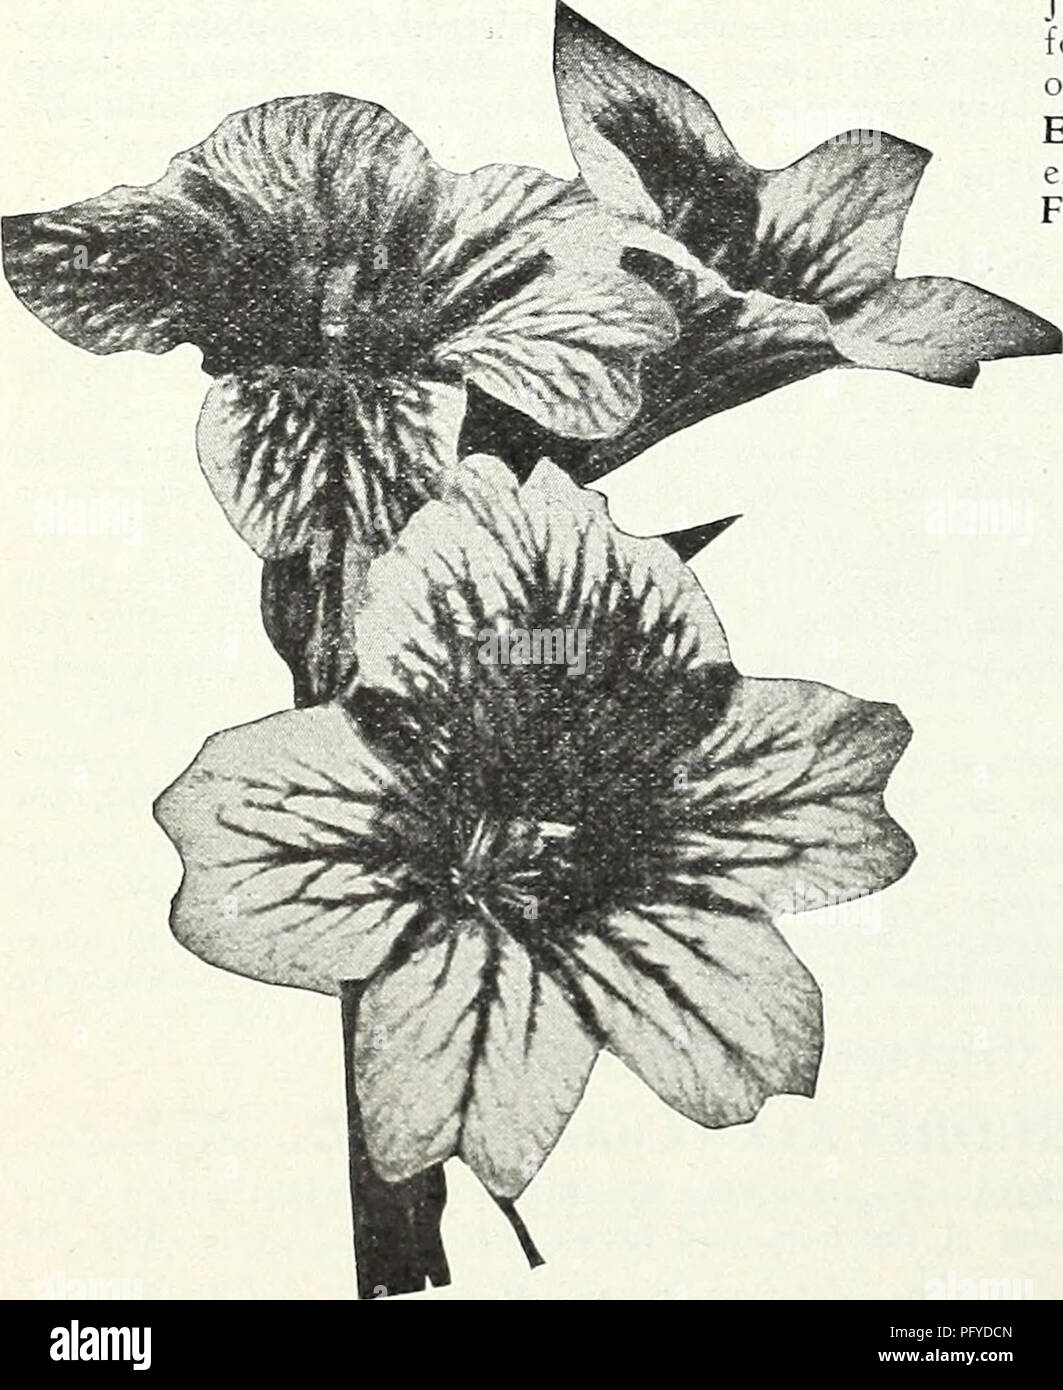 . Currie Bros. : fifty-eighth year 1933. Flowers Seeds Catalogs; Bulbs (Plants) Seeds Catalogs; Vegetables Seeds Catalogs; Nurseries (Horticulture) Catalogs; Plants, Ornamental Catalogs; Gardening Equipment and supplies Catalogs. Scabiosa (Azure Fairy) SILENE (Catchfly) PENDULA COMPACTA—Dwarf, hardy annual, bearing pretty, pink flowers freely; 6 inches. Pkt. 10c (For Perennial Seeds, See Page 53). SalpiglossU SCABIOSA (Mourning Bride) Excellent border plants, producing an abundance of long stemmed, double flowers in many colors. Splendid for cutting. LARGE FLOWERING ANNUAL SCABIOSA U oz. Pkt.  Stock Photo